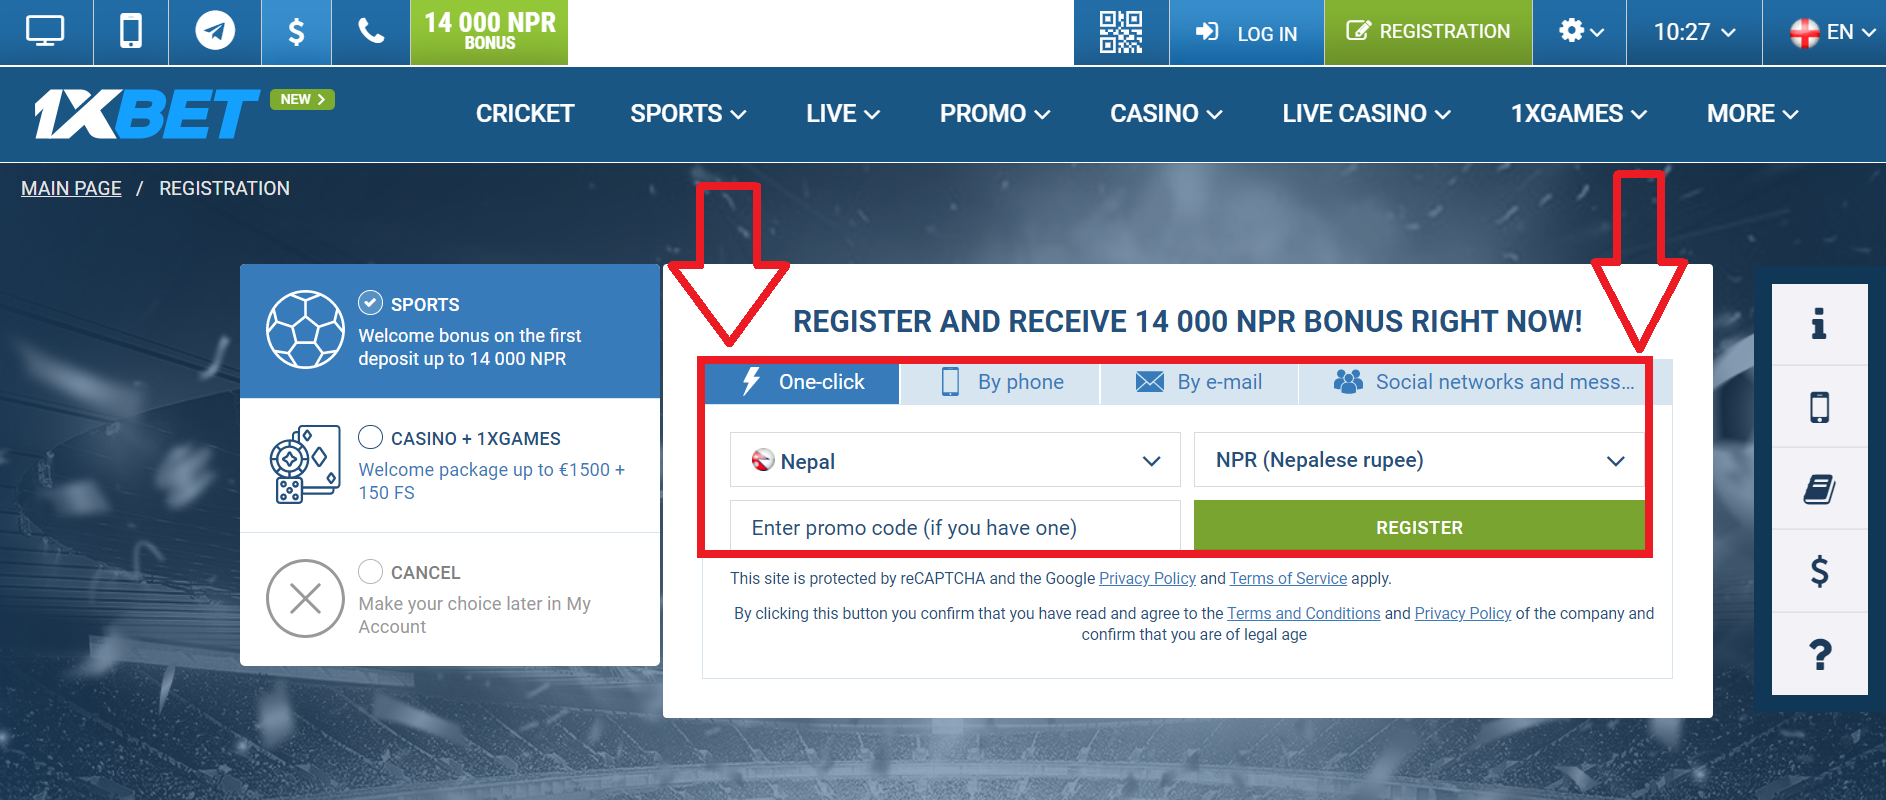 1XBET offers bonuses after the login